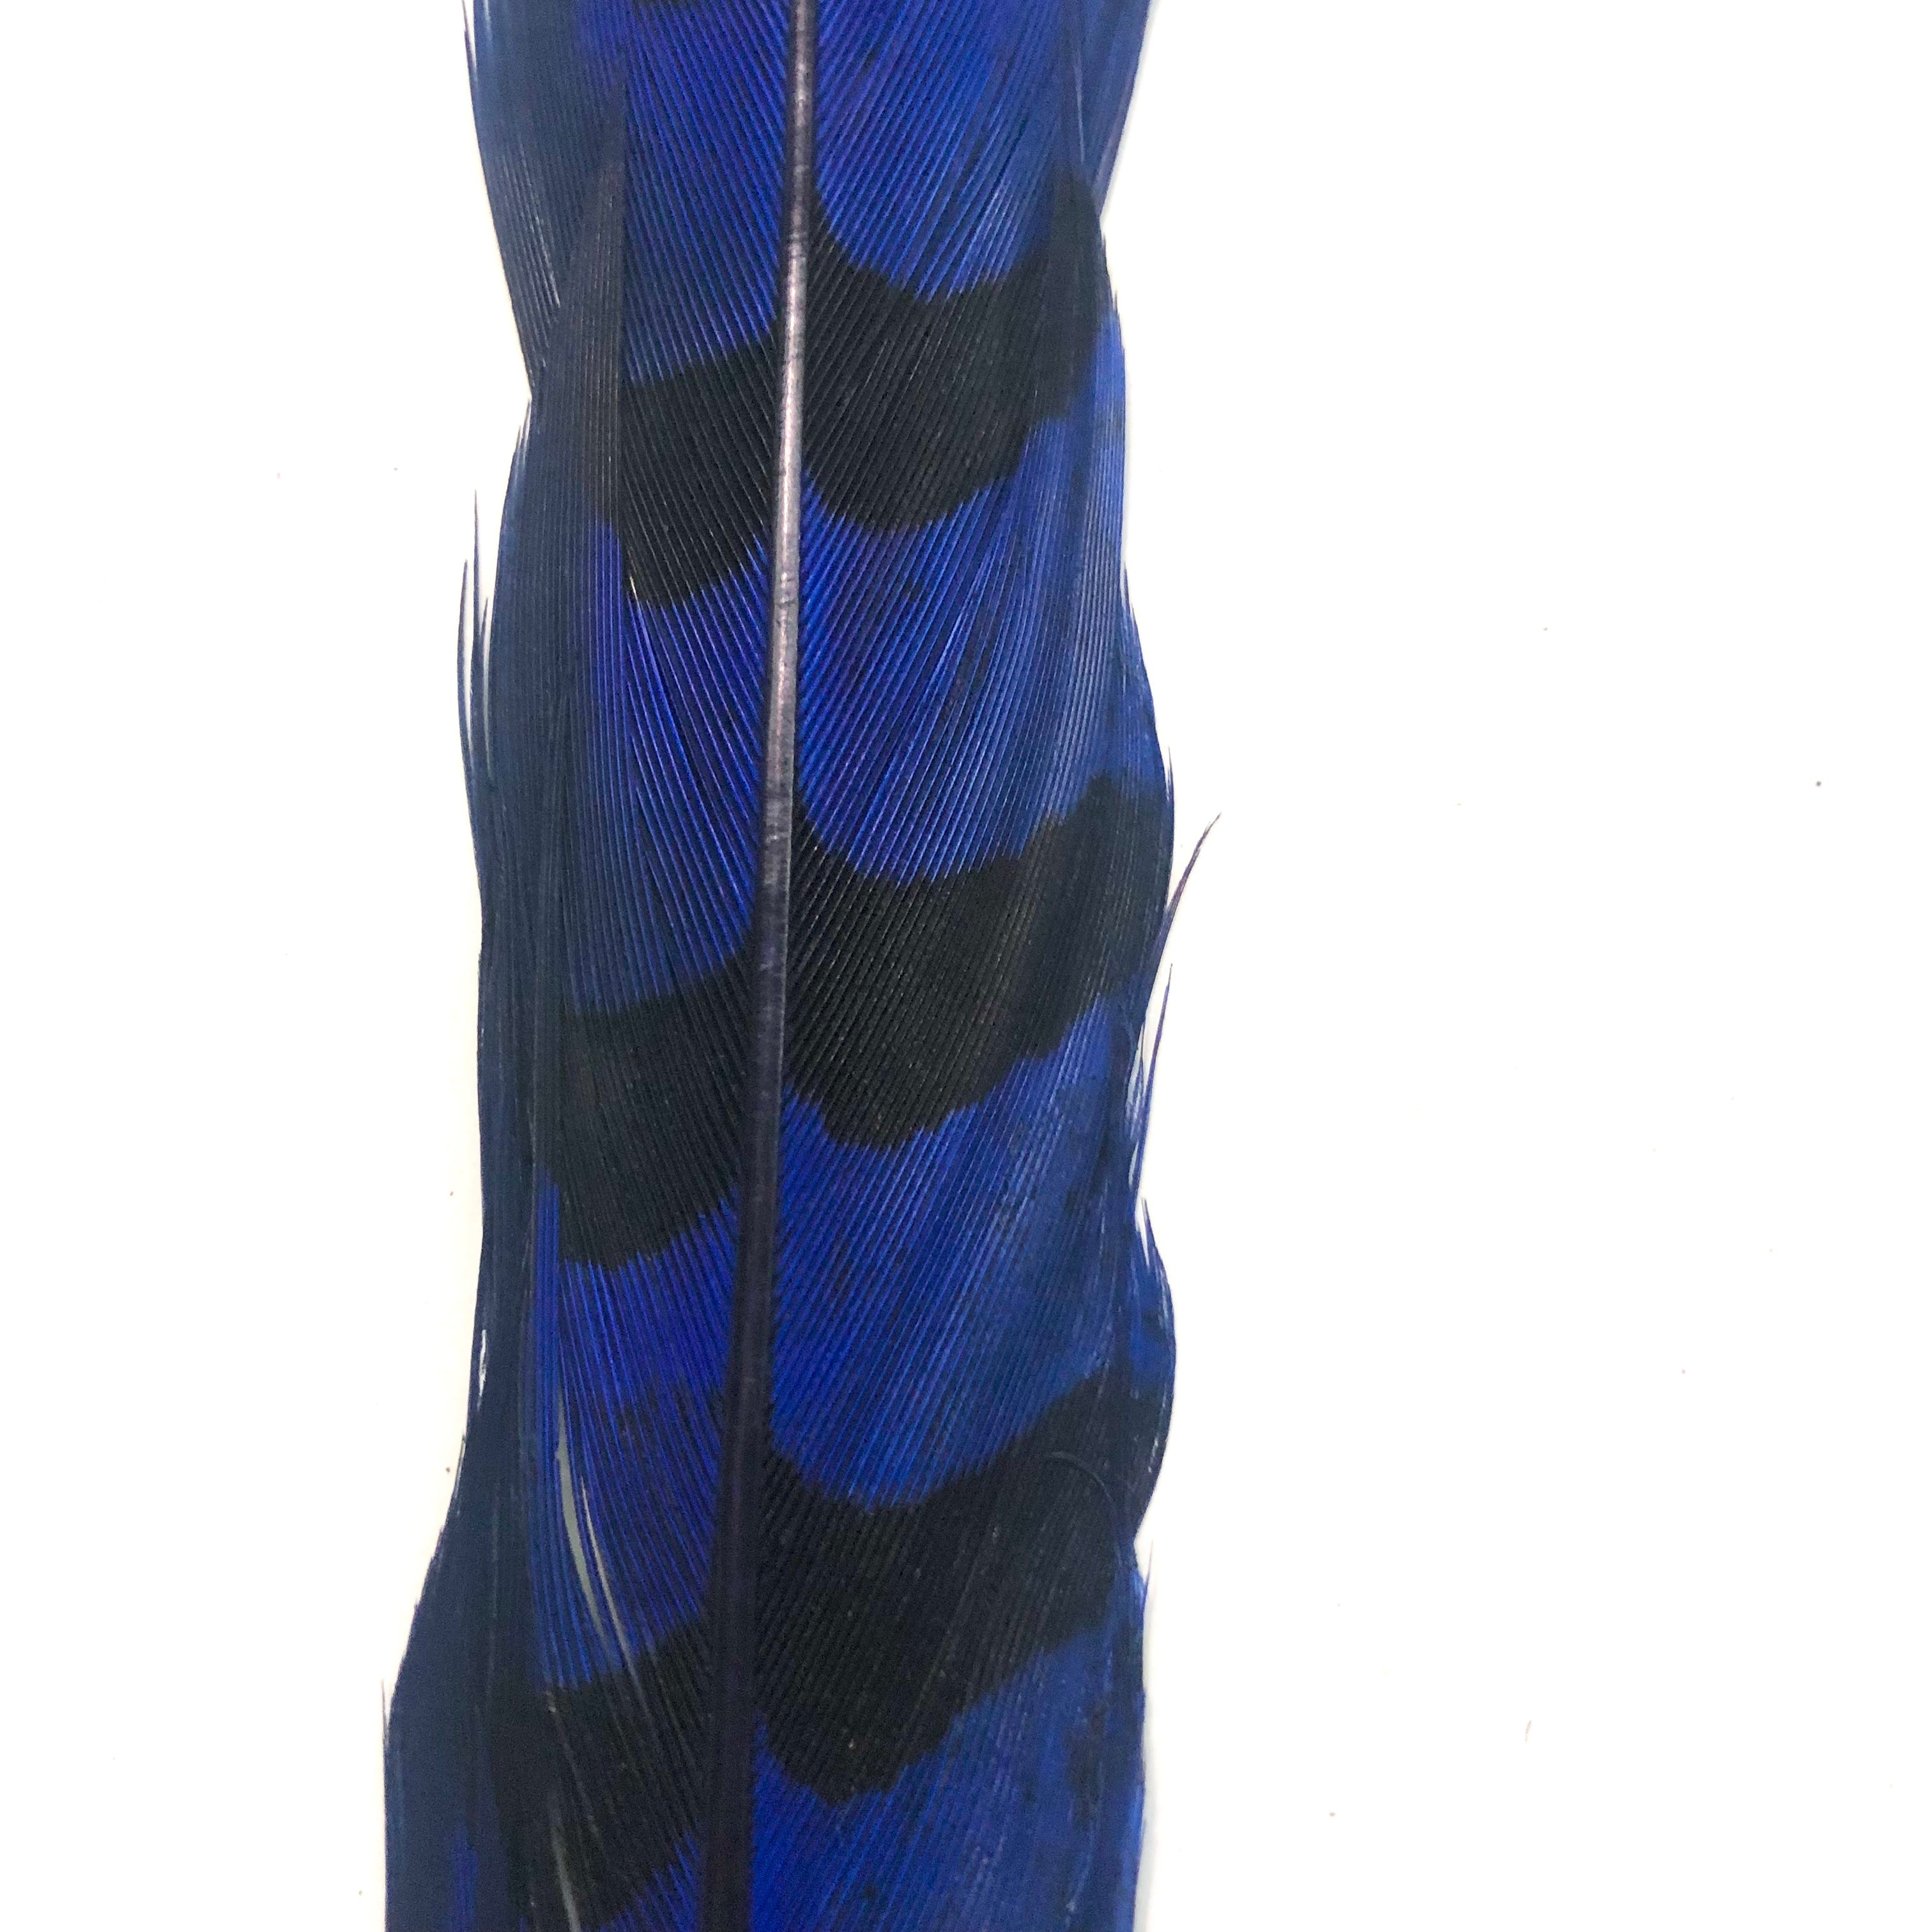 30" to 32" Reeves Pheasant Tail Feather - Royal Blue